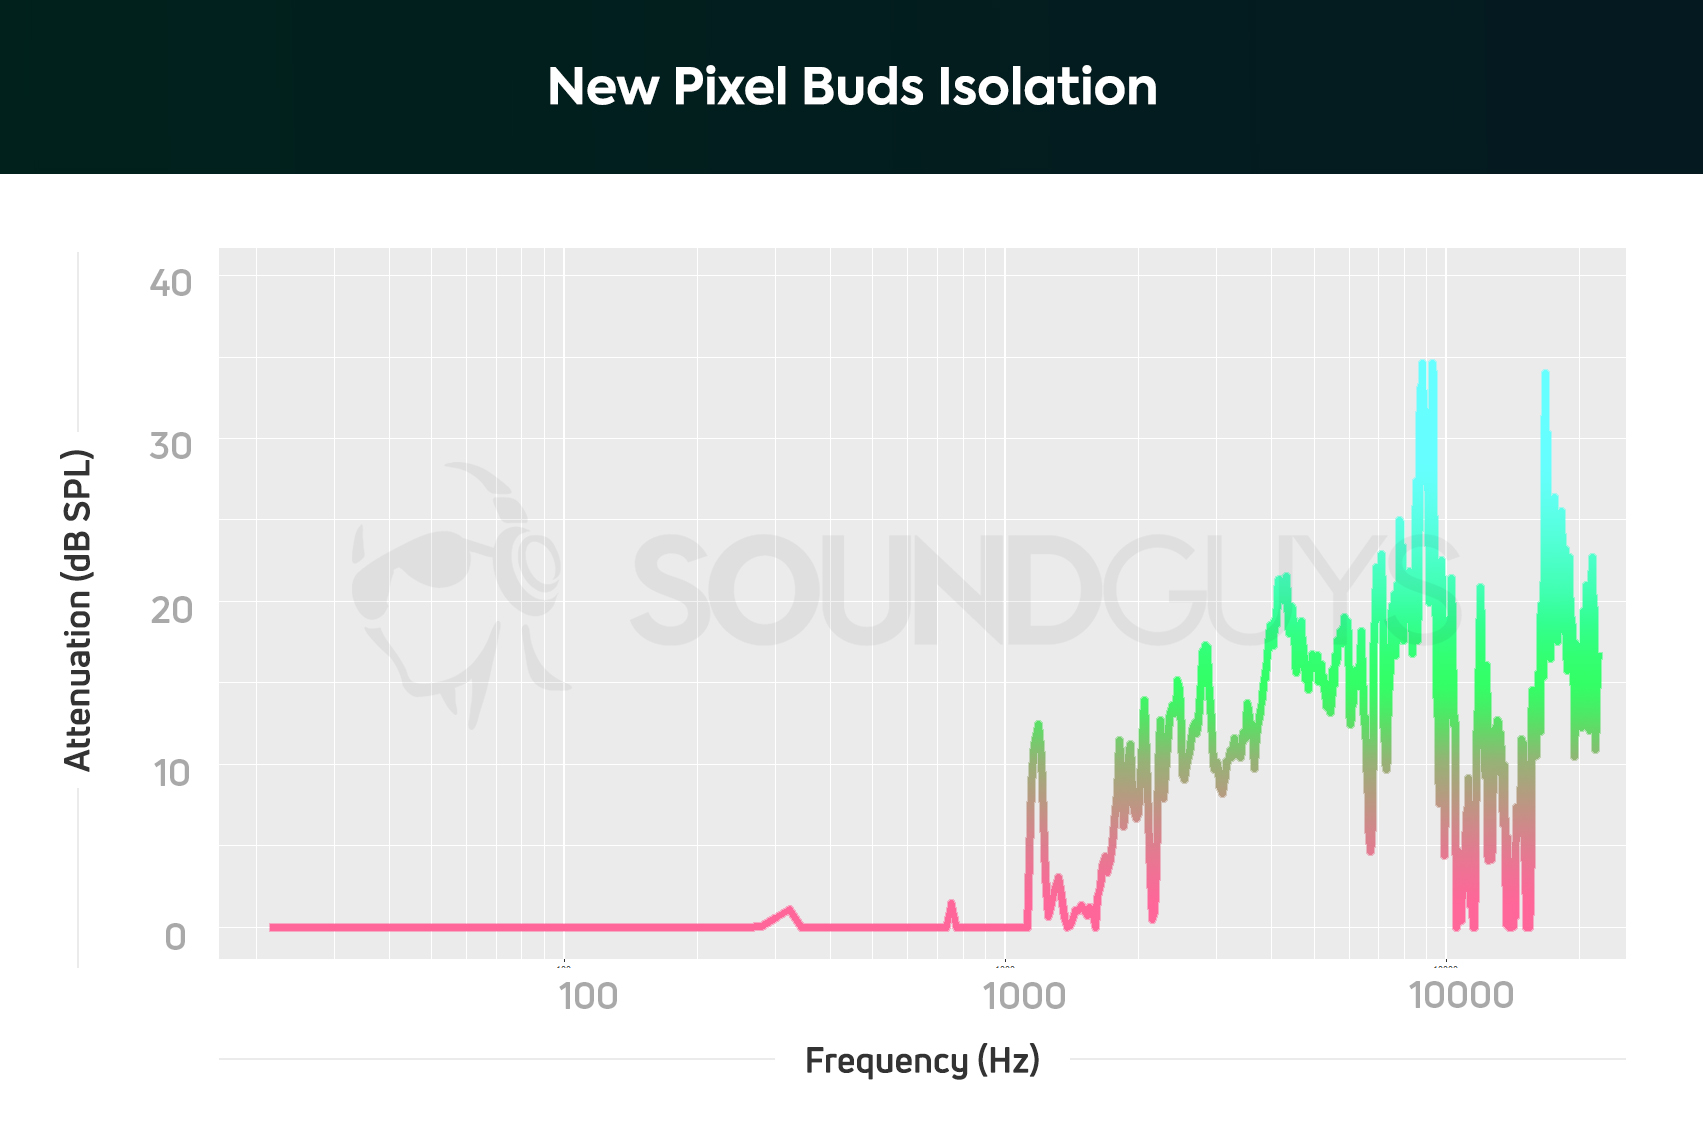 New Pixel Buds Isolation